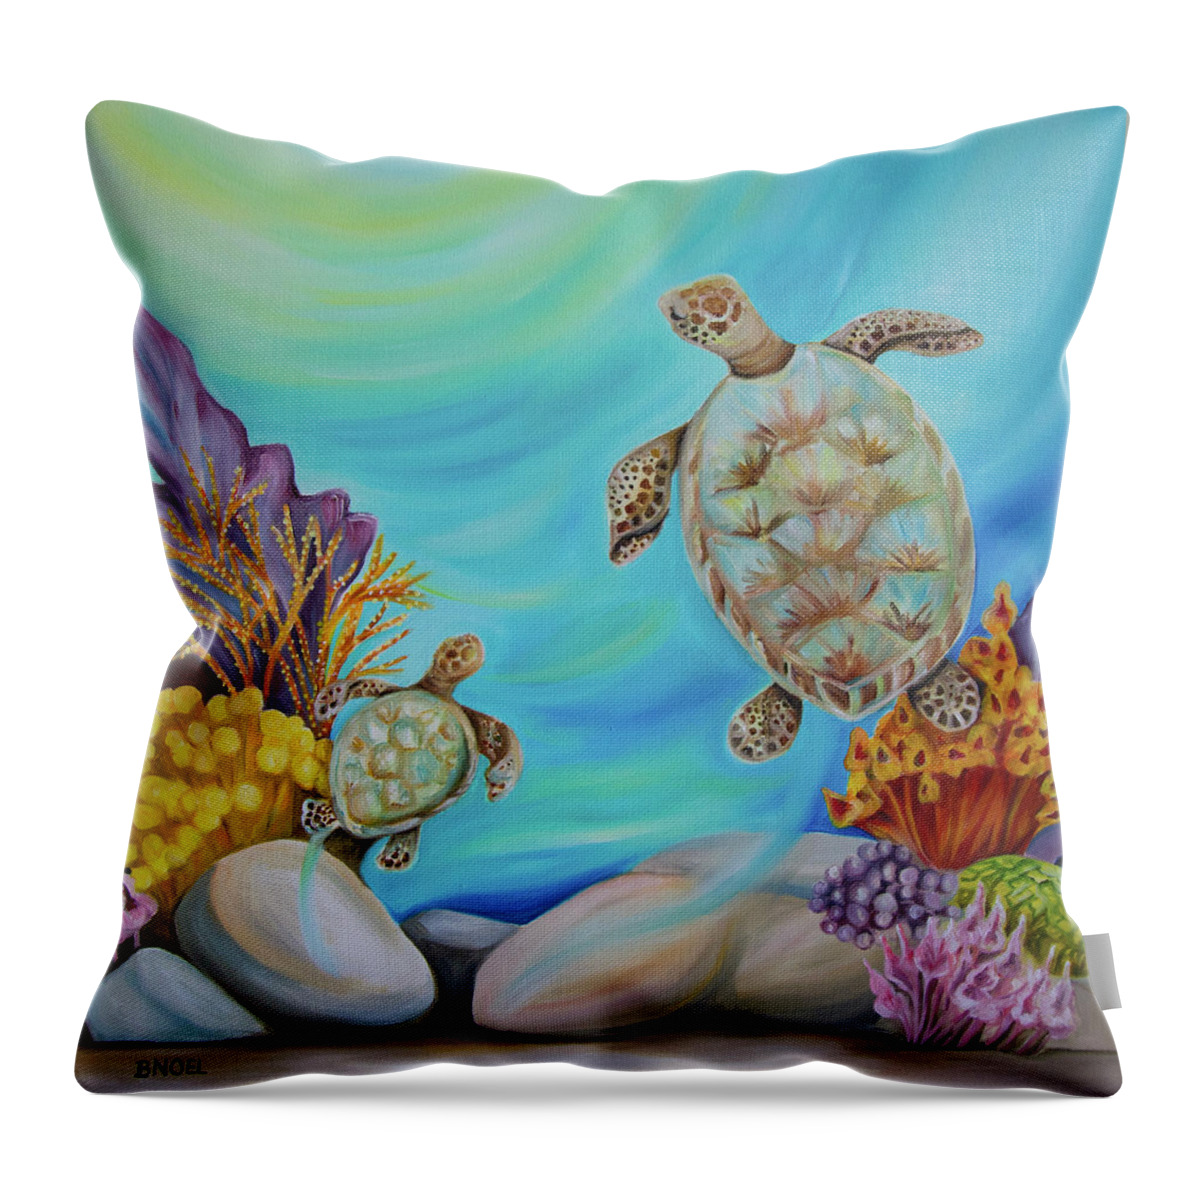 Sea Turtles Throw Pillow featuring the painting Sea Turtles No. 01 by Barbara Noel